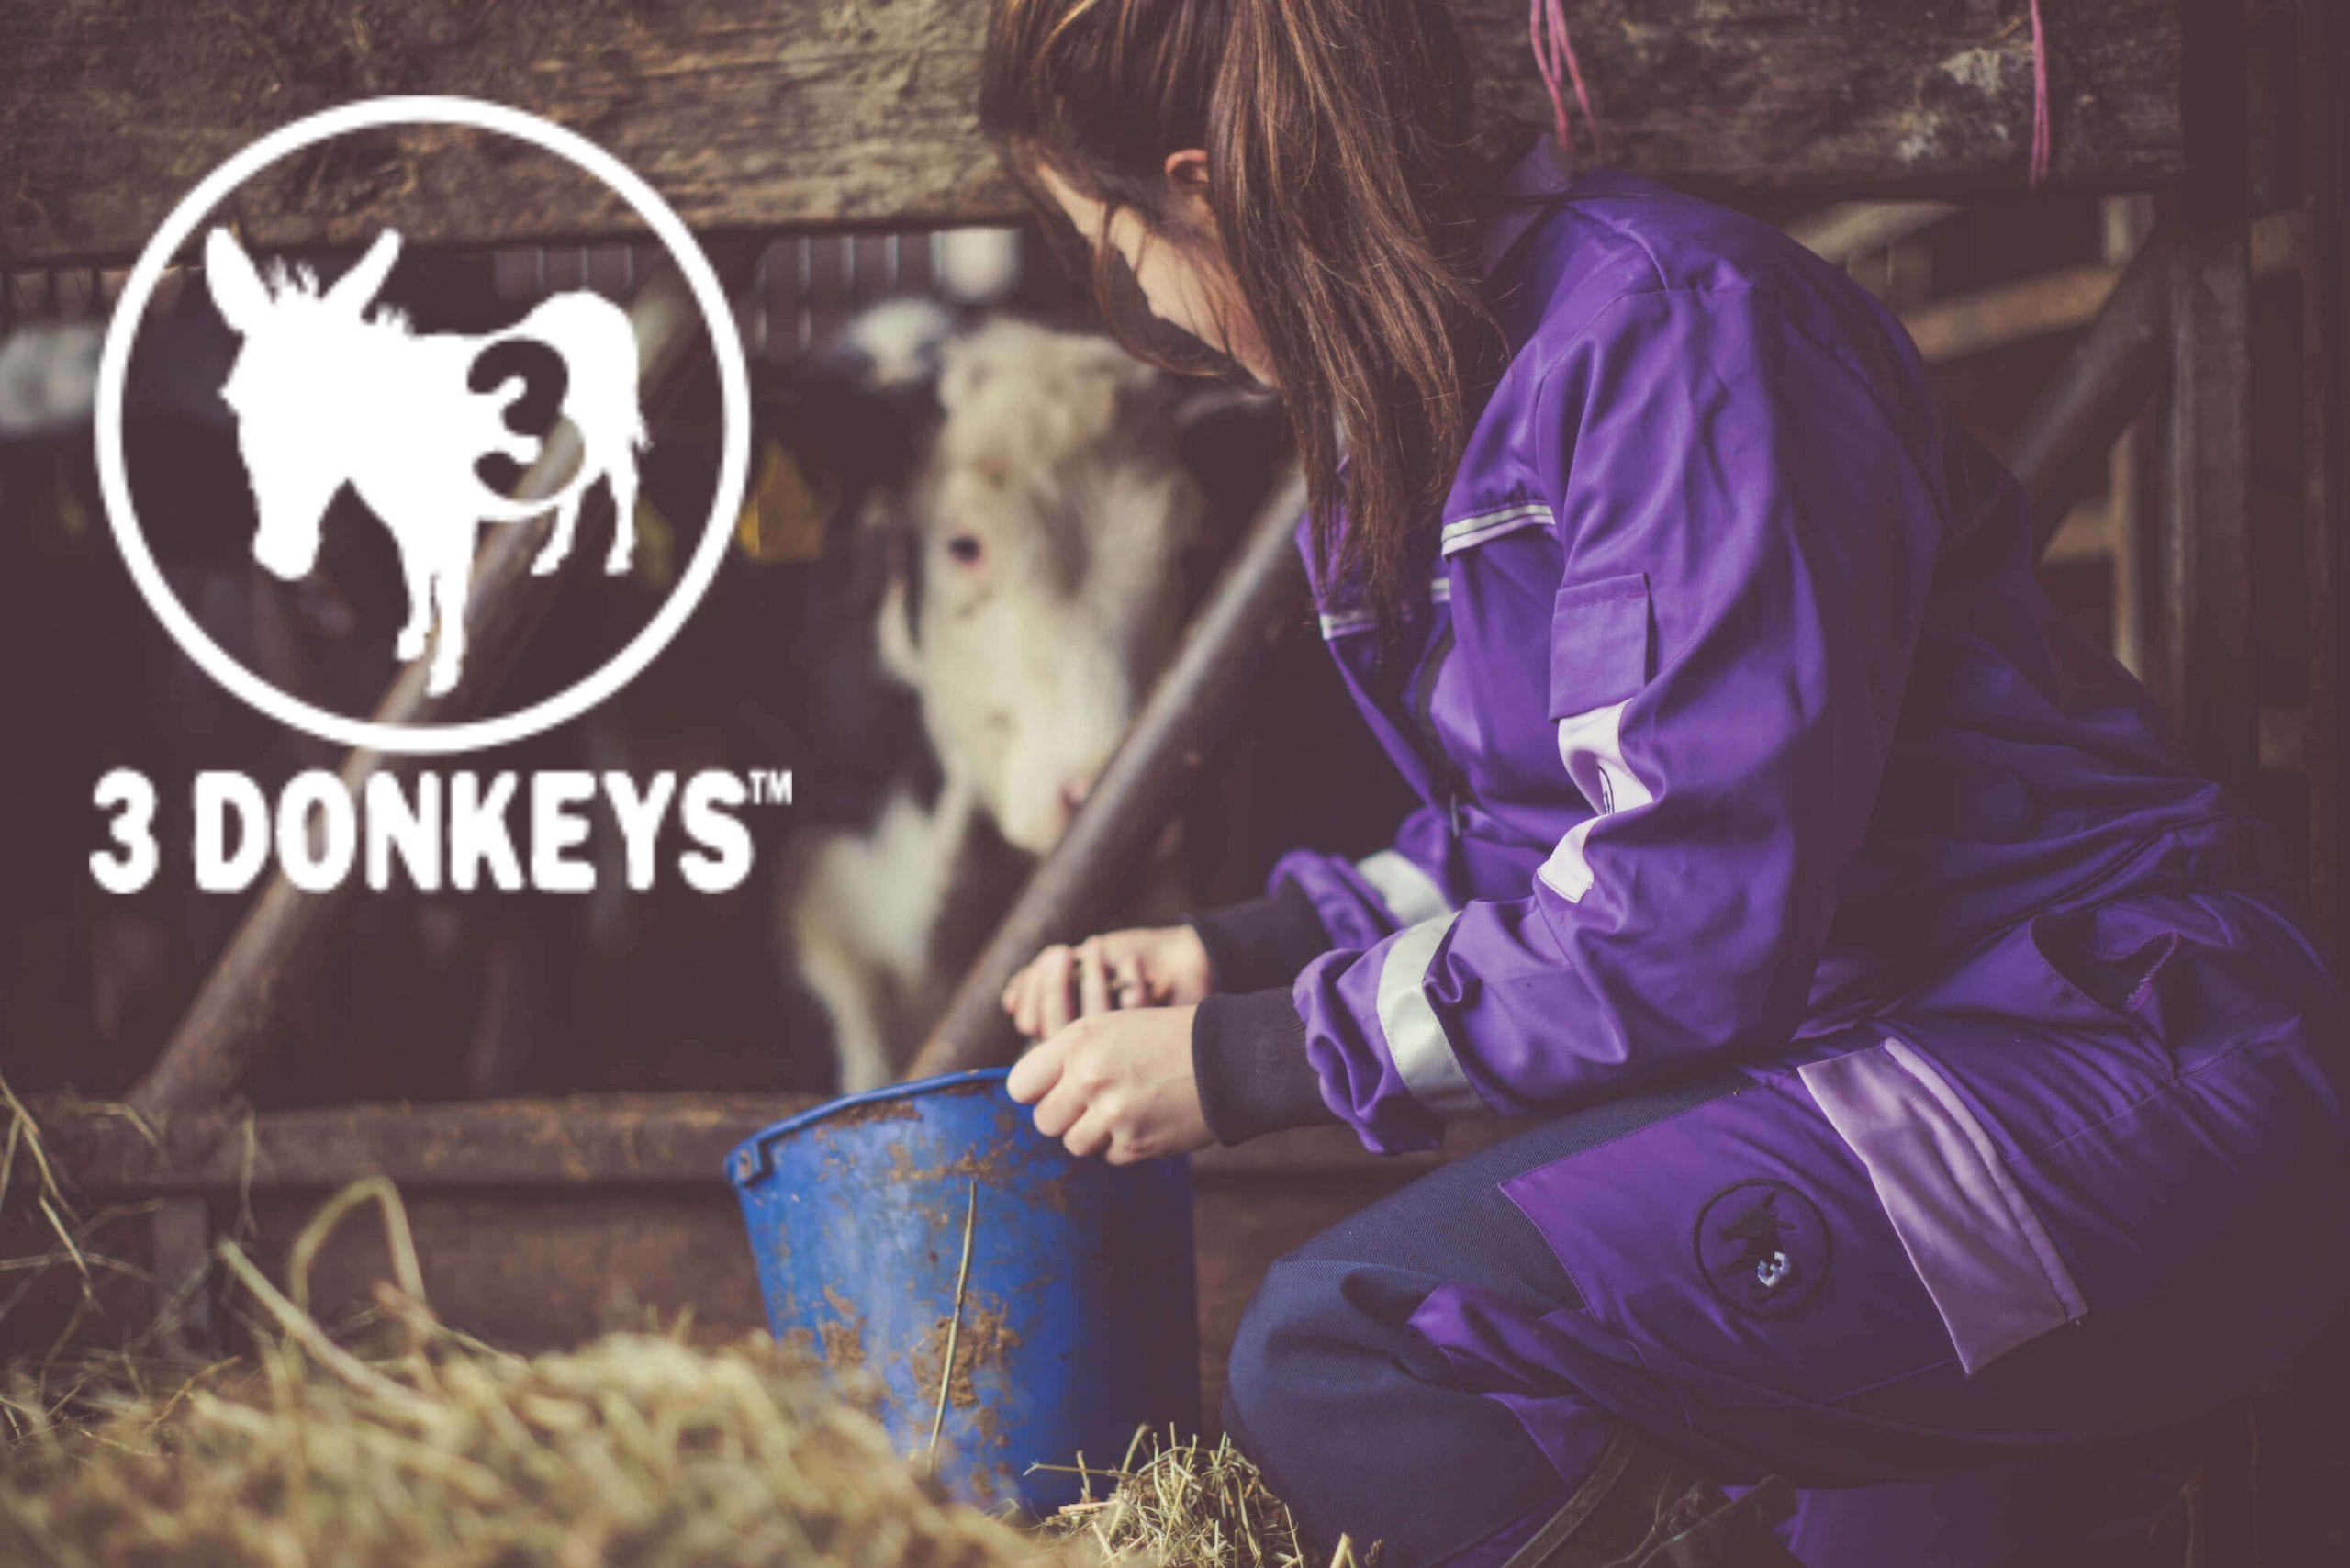 3 DOnkeys Coveralls with logo